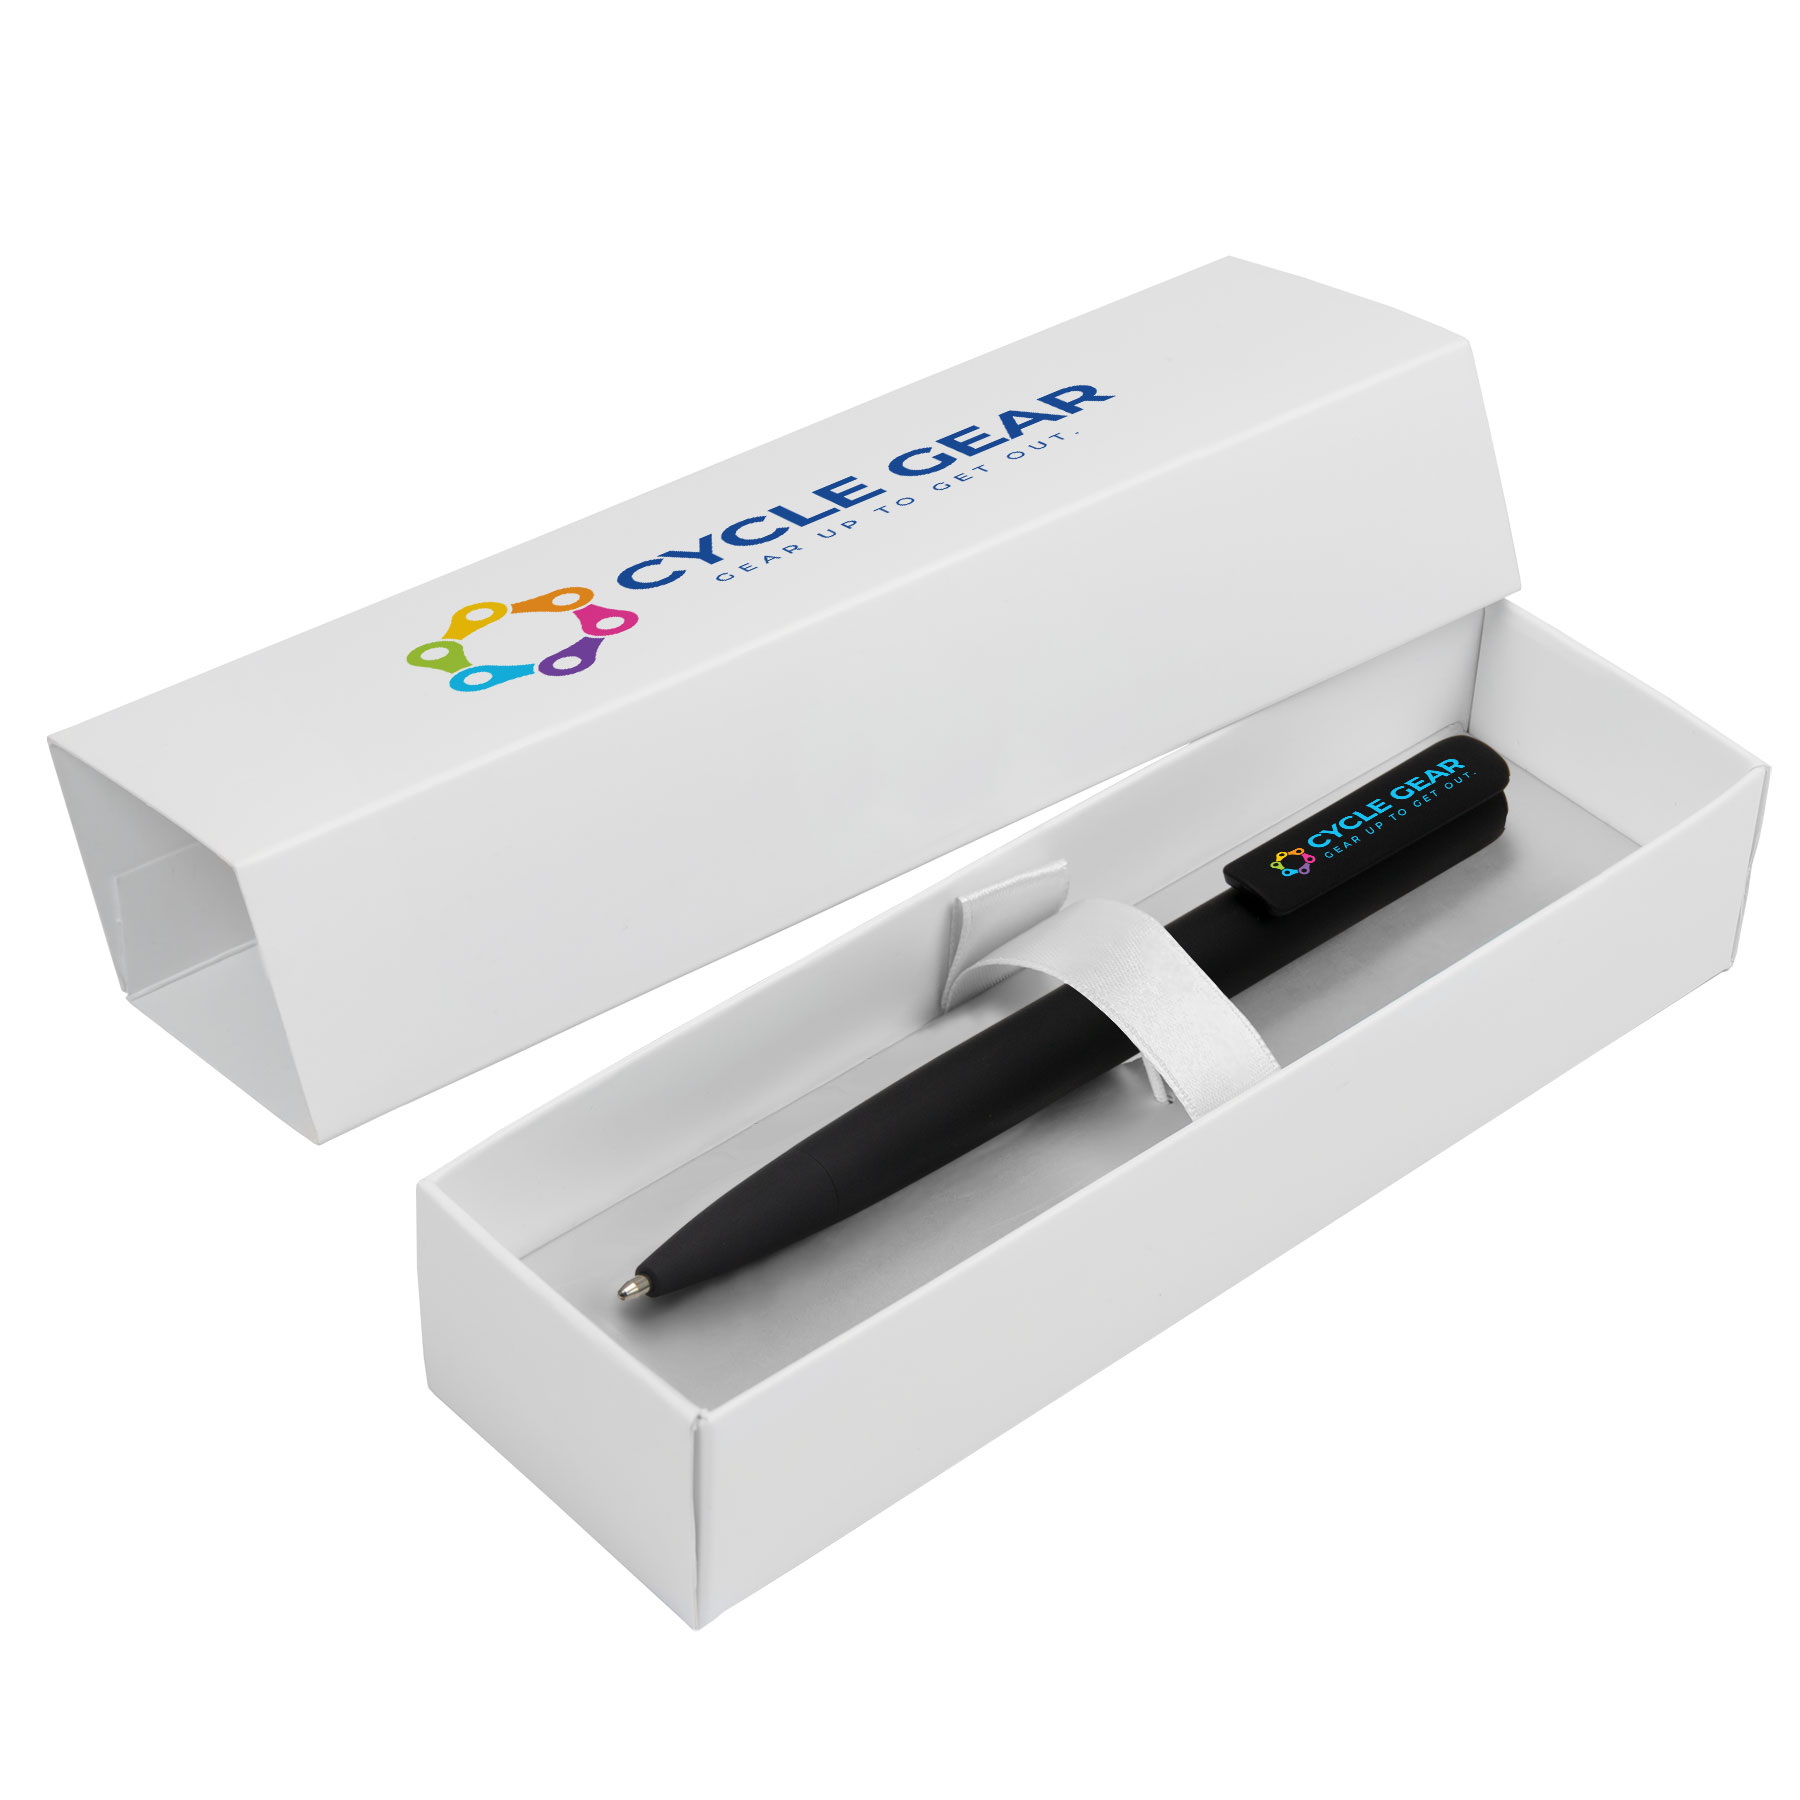 Jagger Gift Box - ColorJet on Pen and Box